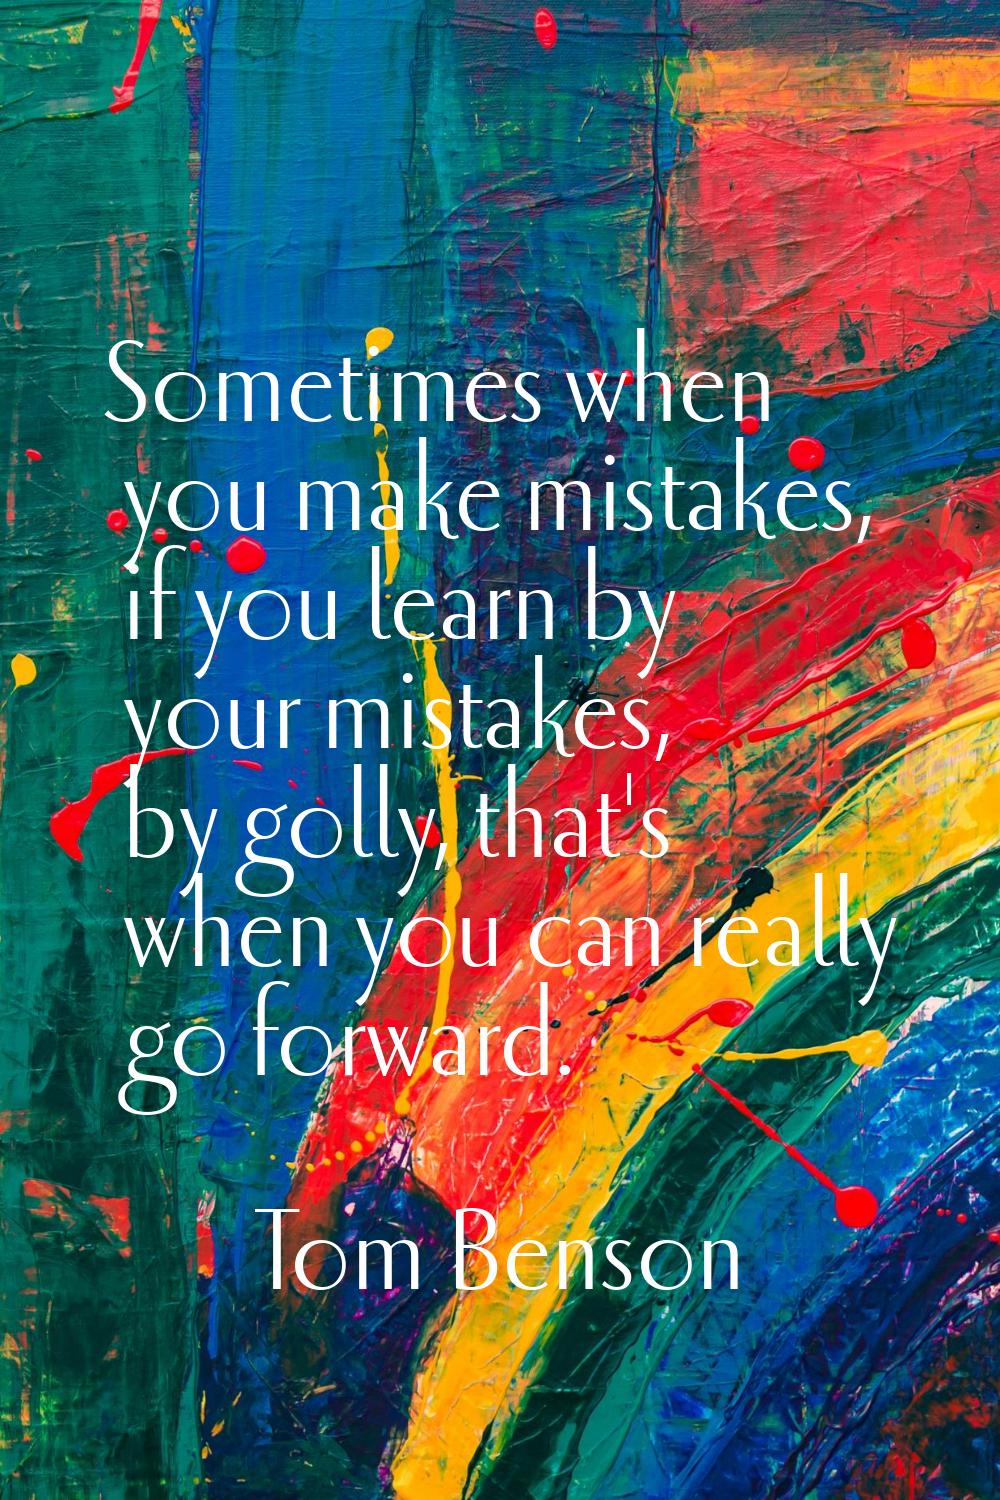 Sometimes when you make mistakes, if you learn by your mistakes, by golly, that's when you can real